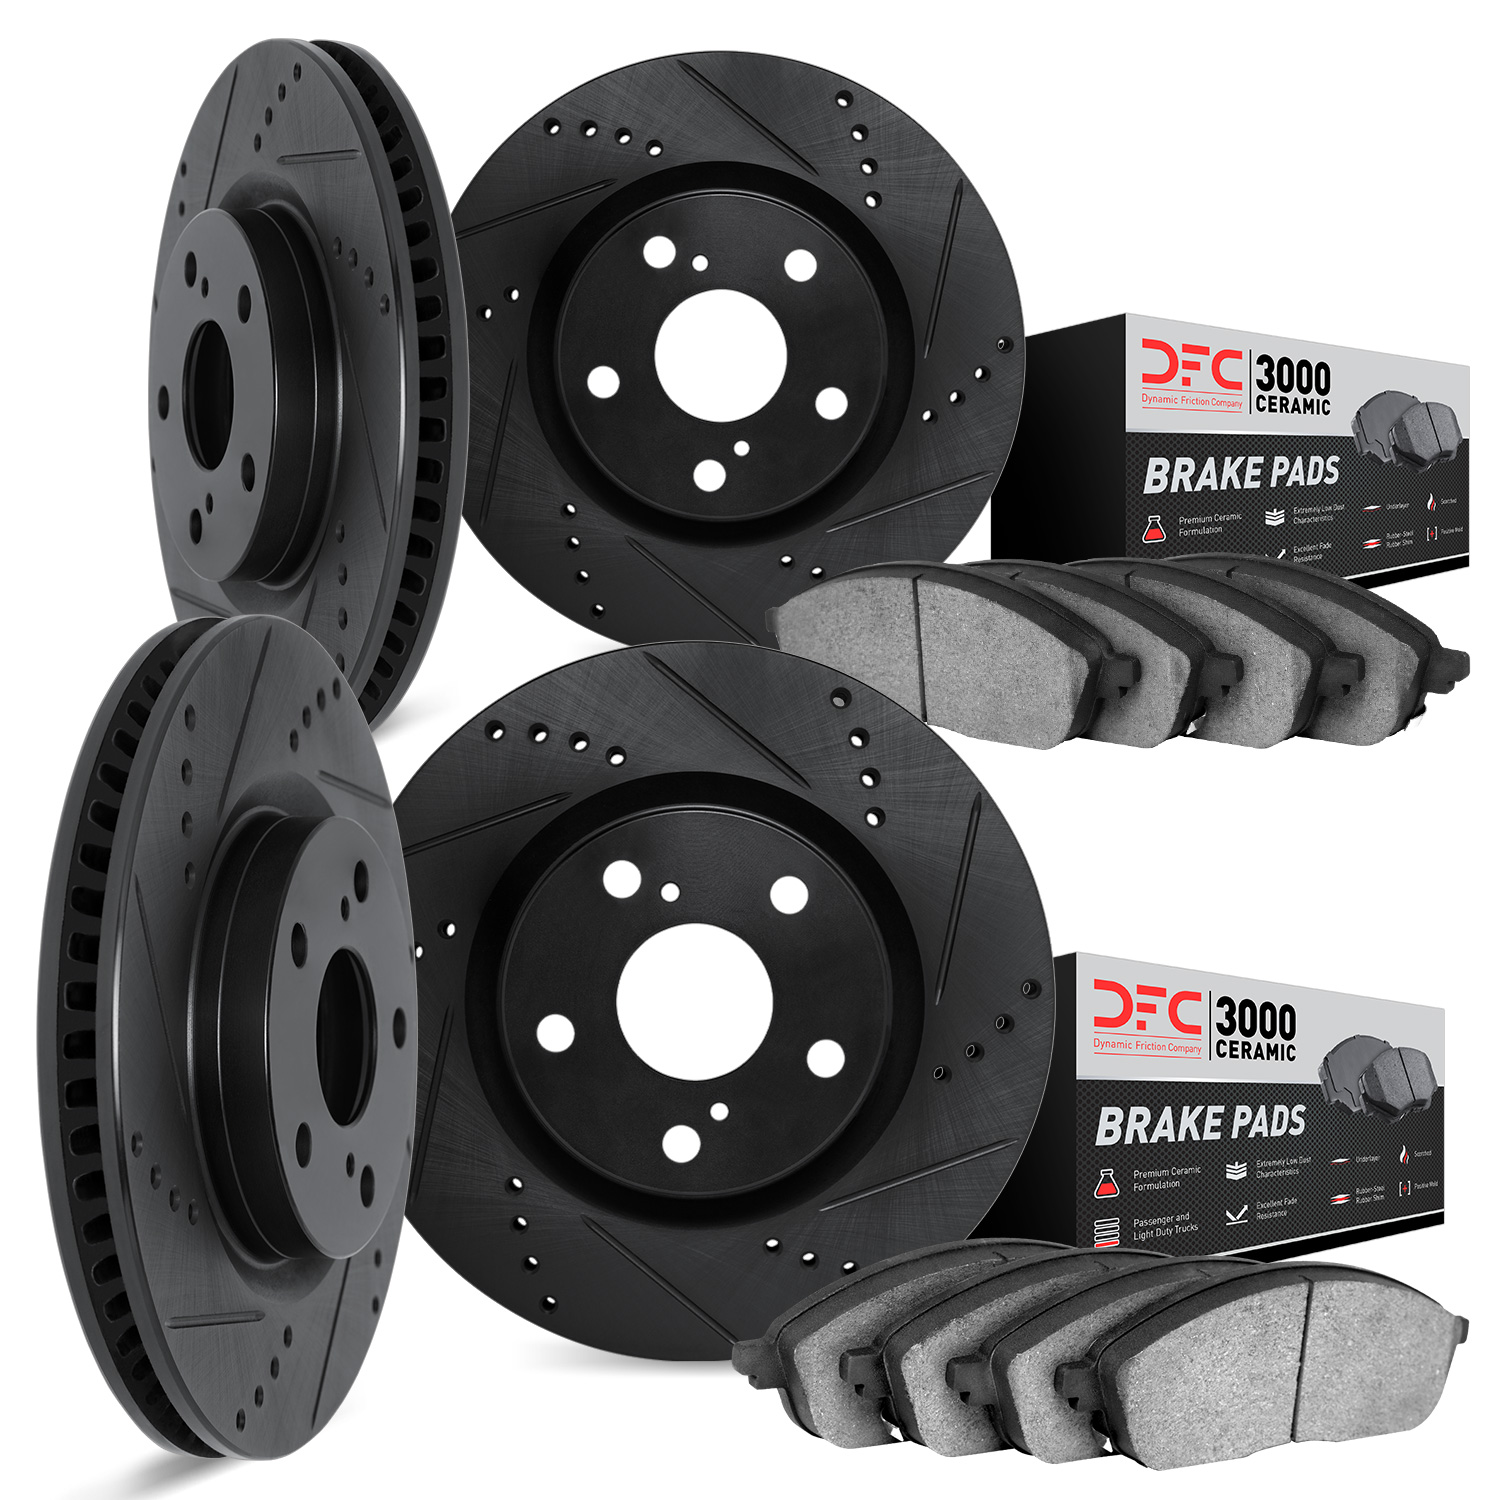 8304-31078 Drilled/Slotted Brake Rotors with 3000-Series Ceramic Brake Pads Kit [Black], 2011-2016 BMW, Position: Front and Rear